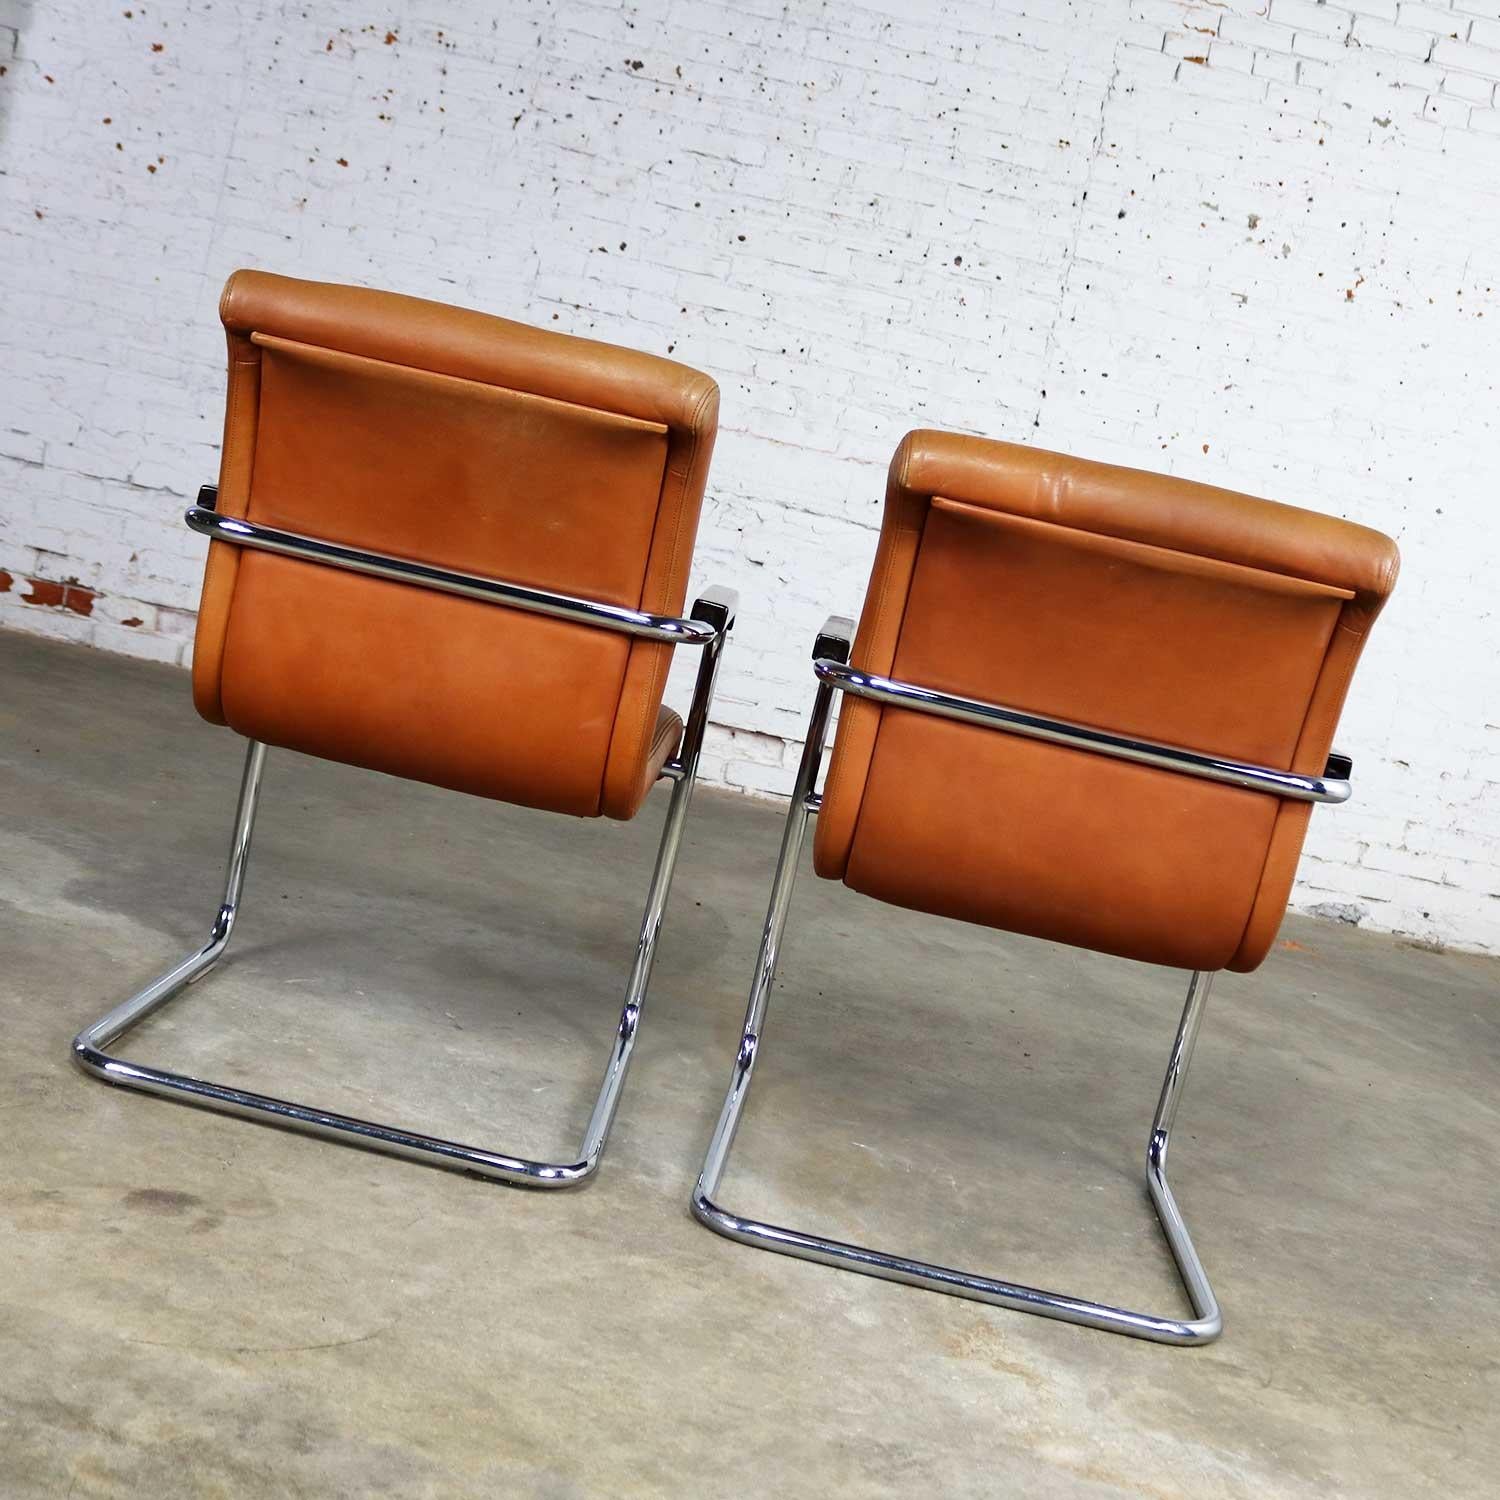 Cantilevered Chrome Cognac Leather Chairs Mid-Century Modern 3